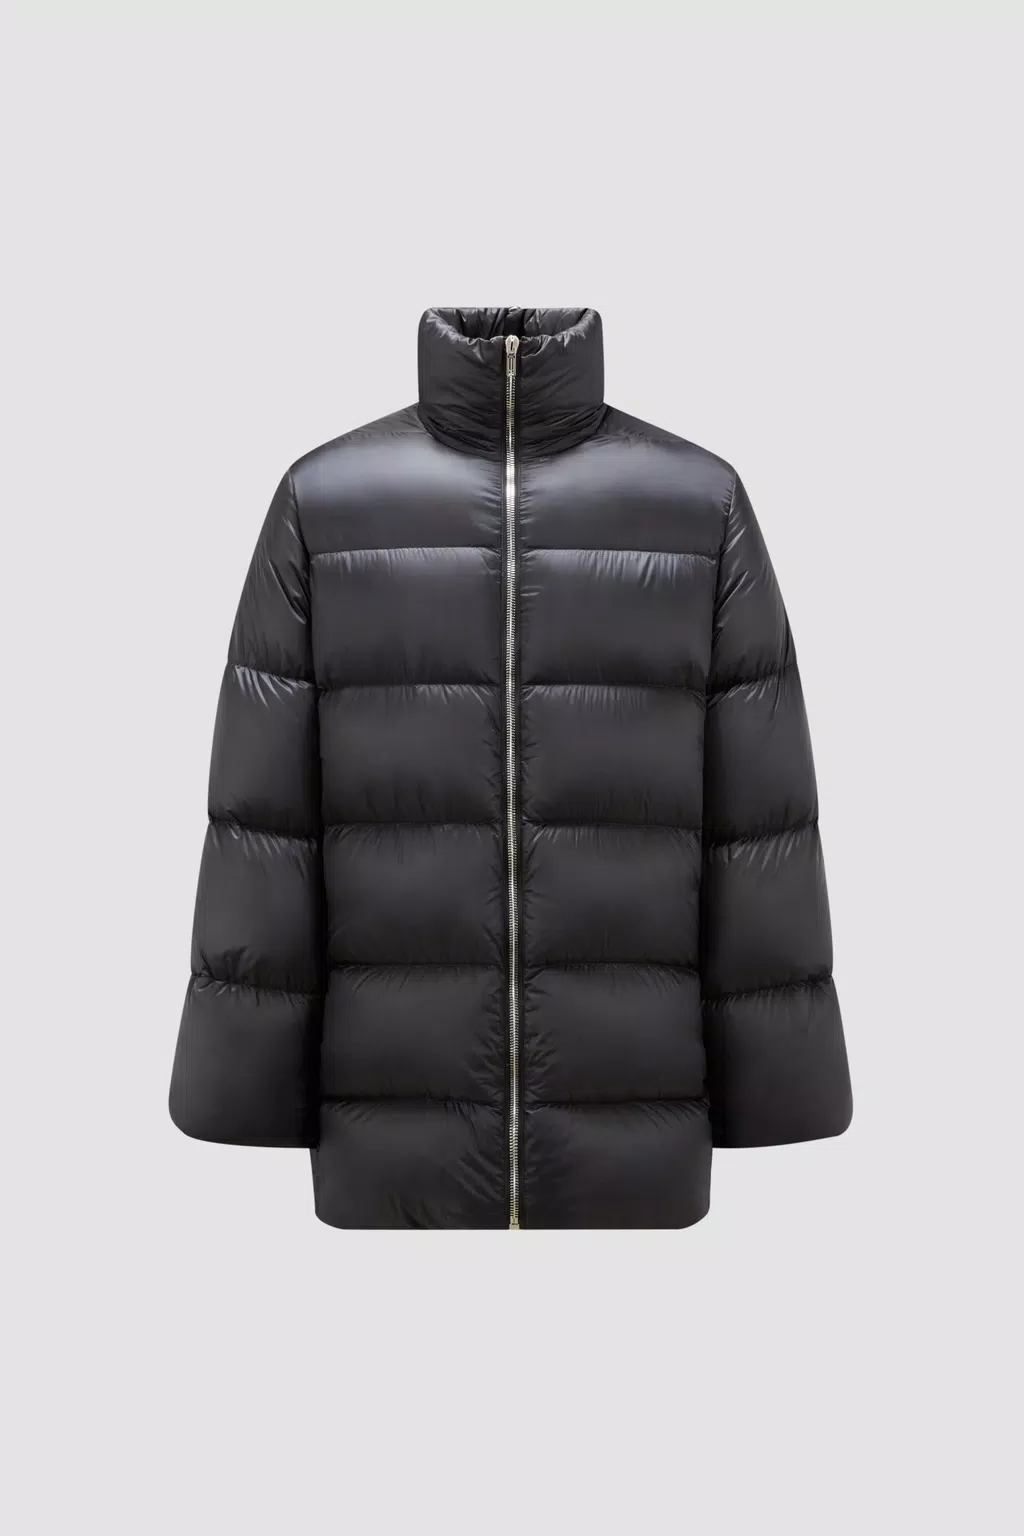 Black Radiance Convertible Short Down Jacket - for Special Projects ...